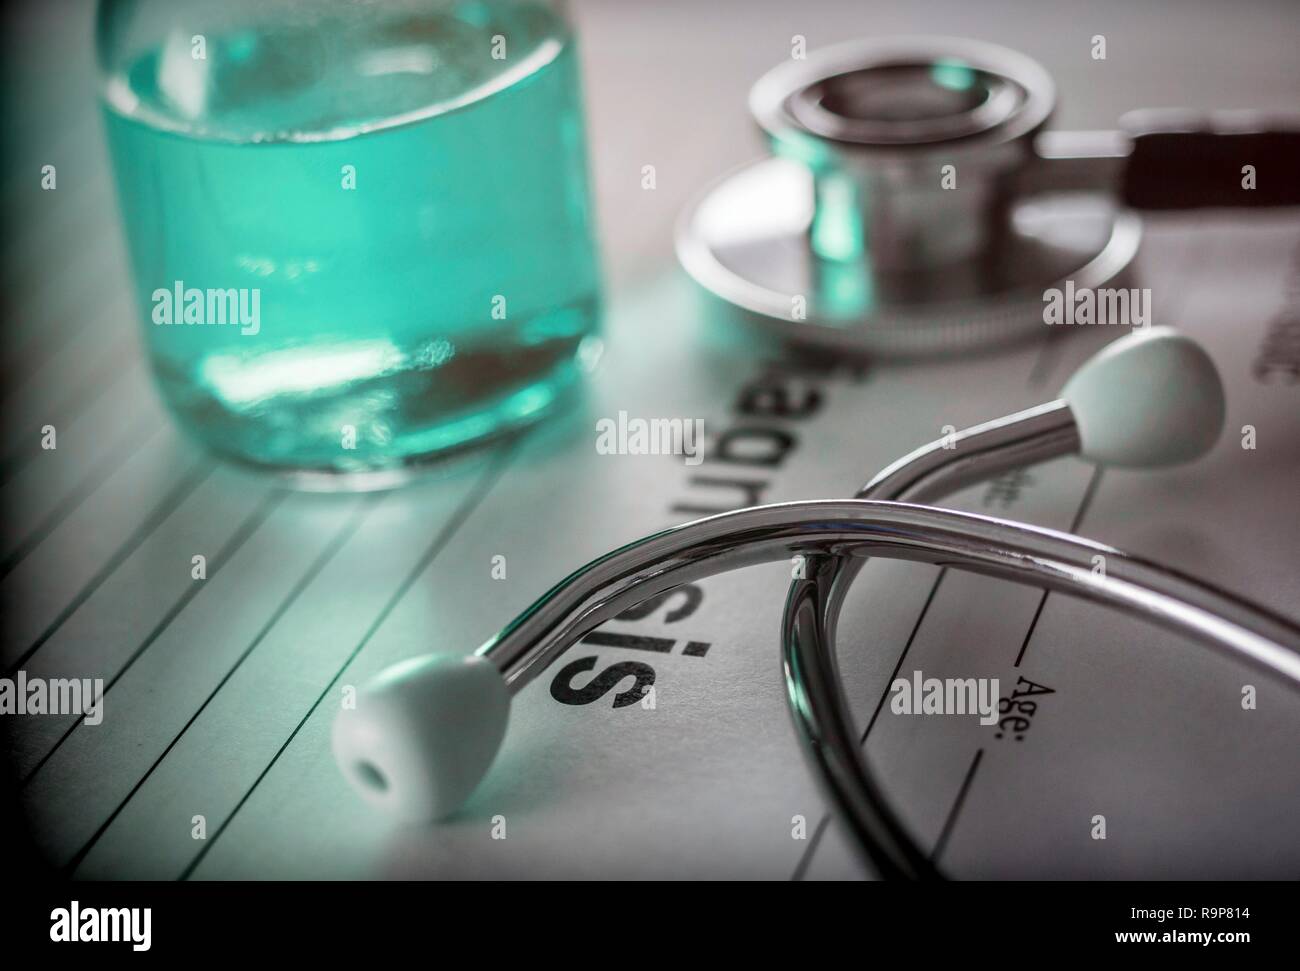 Vial of medication along with a stethoscope, conceptual image Stock Photo